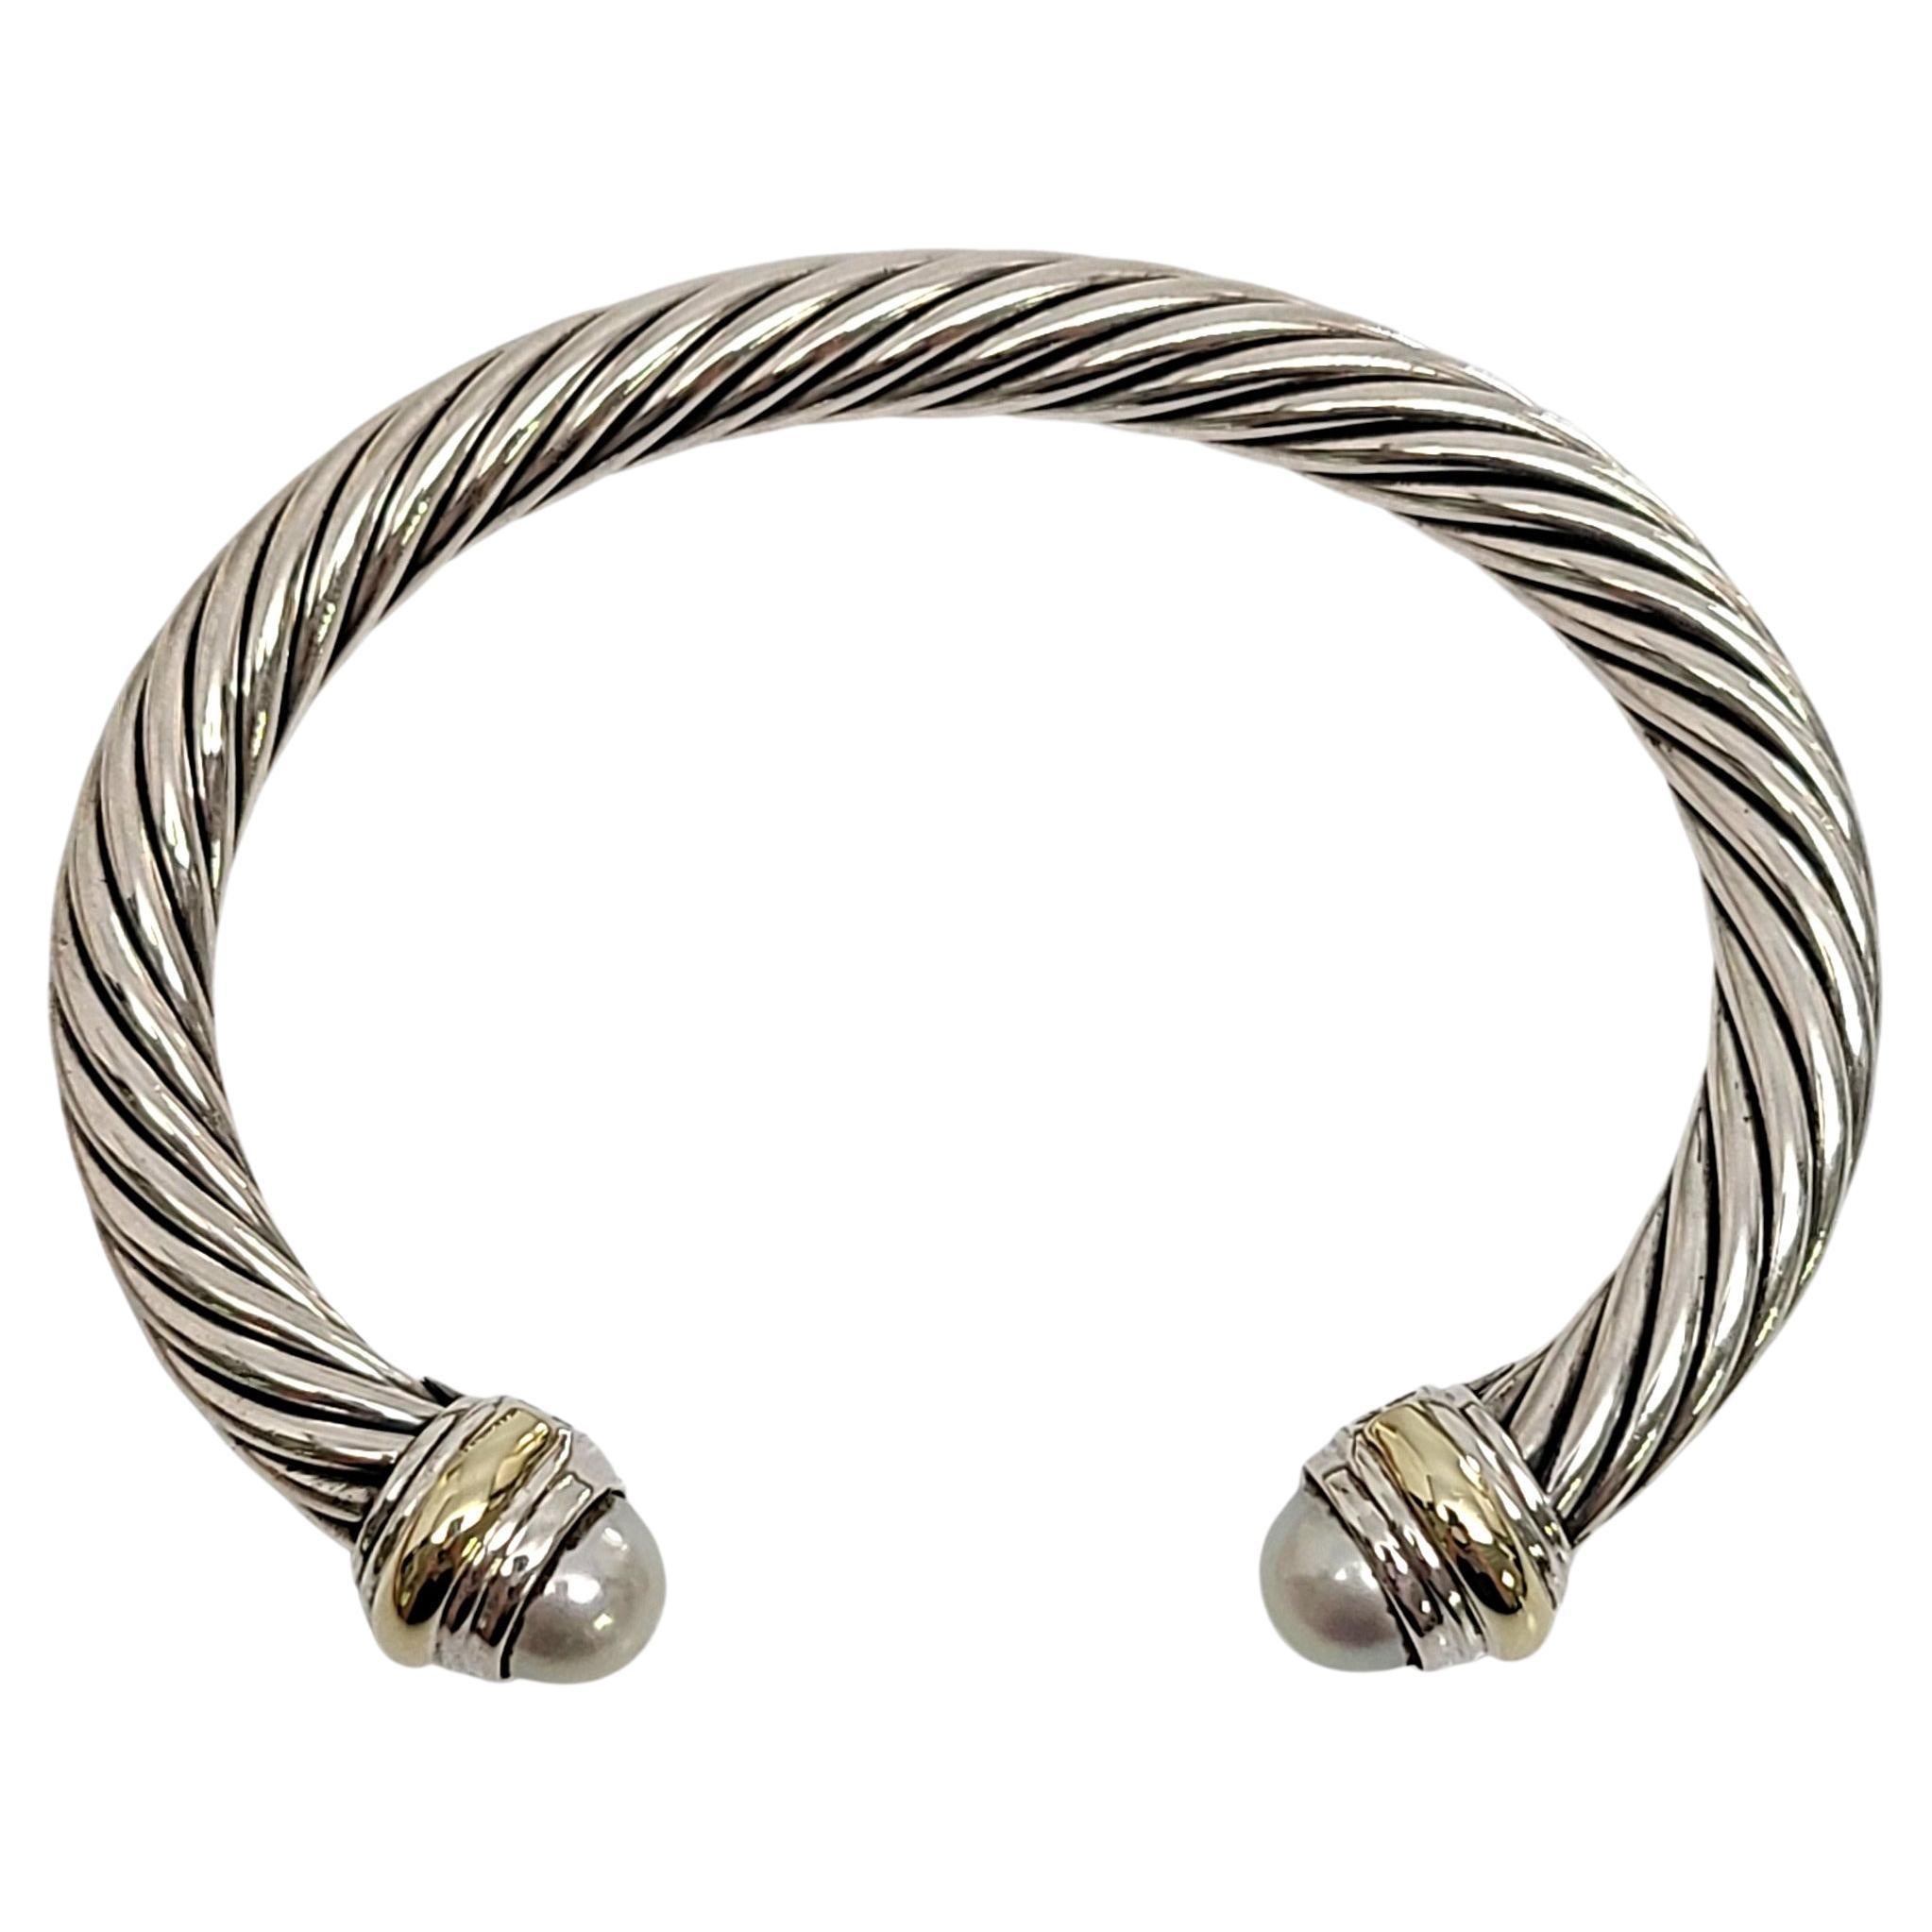 David Yurman Sterling Silver 14K Yellow Gold Accent Cable Classics Cuff Bracelet